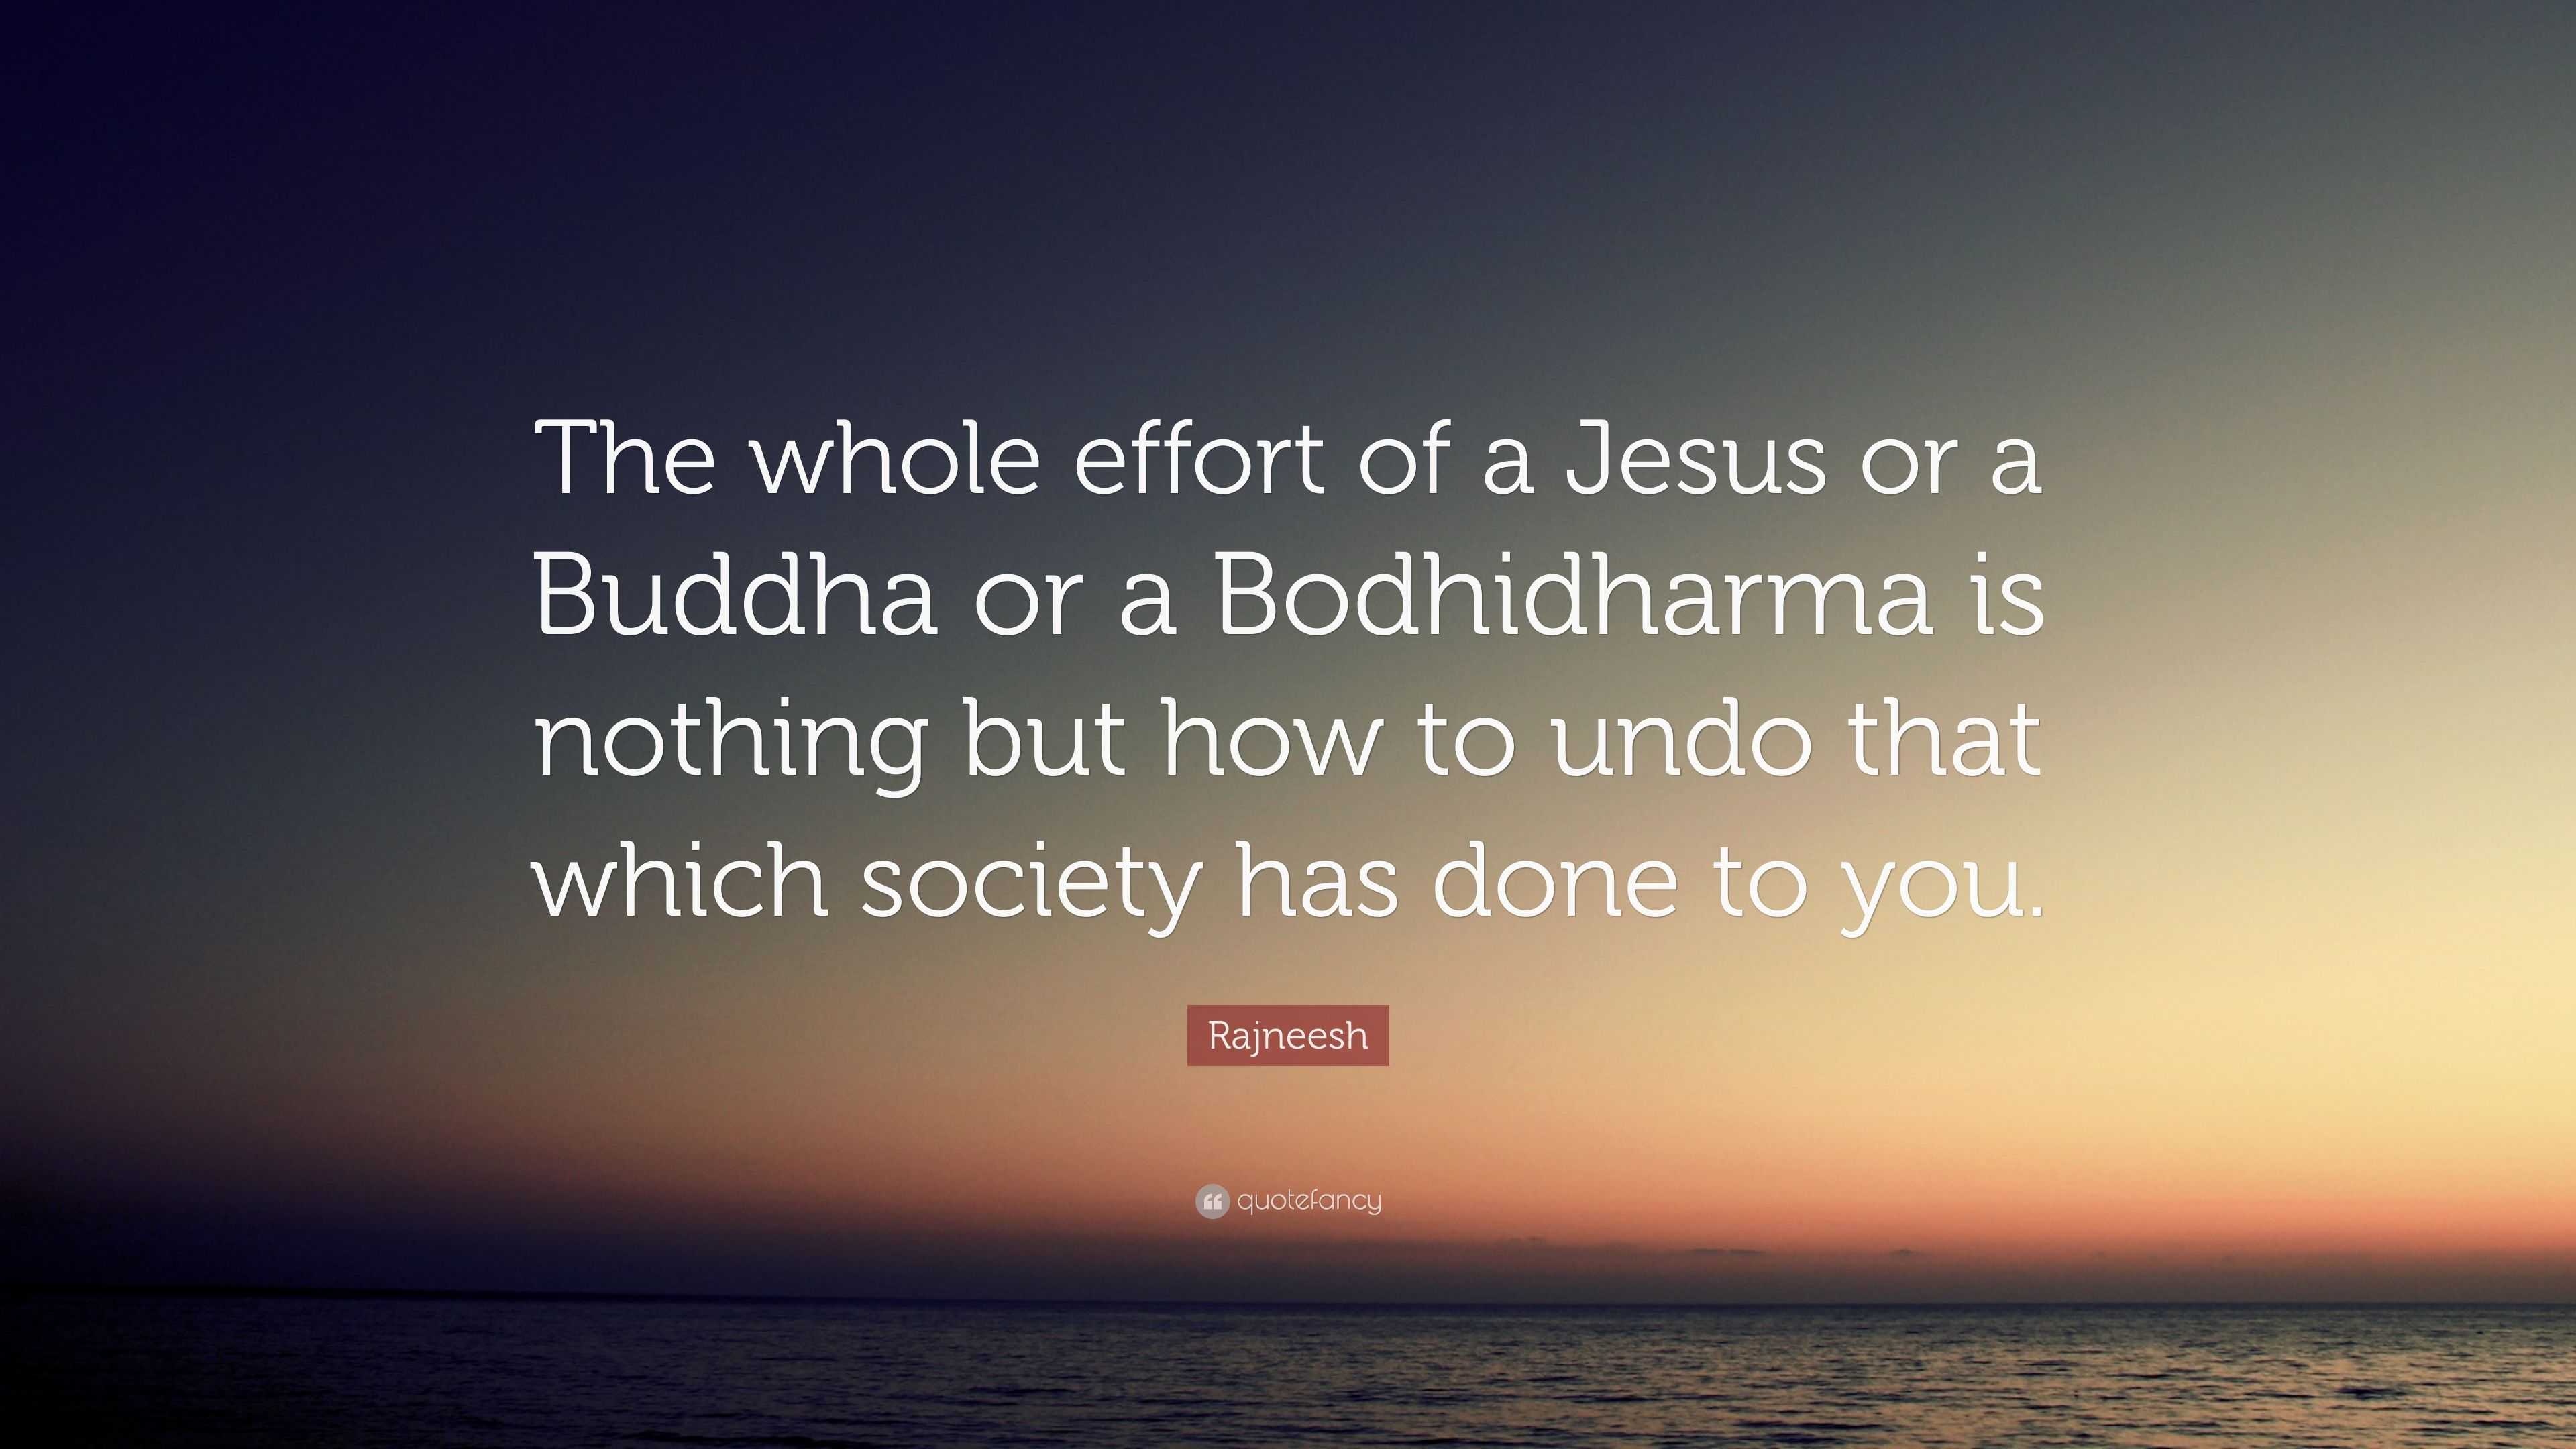 Rajneesh Quote: “The whole effort of a Jesus or a Buddha or a ...